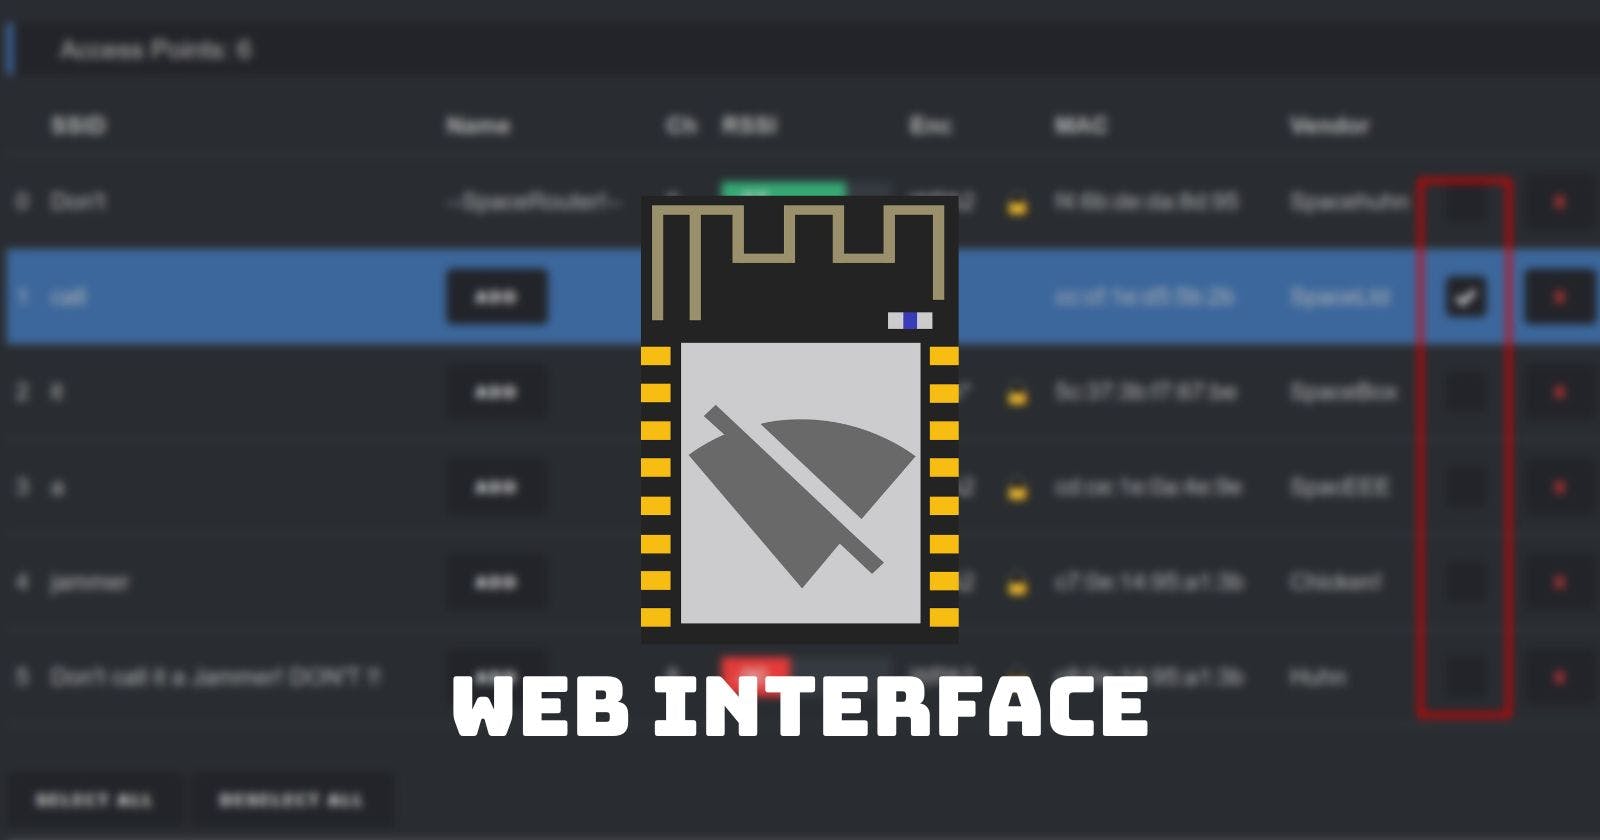 Deauther Web Interface Explained